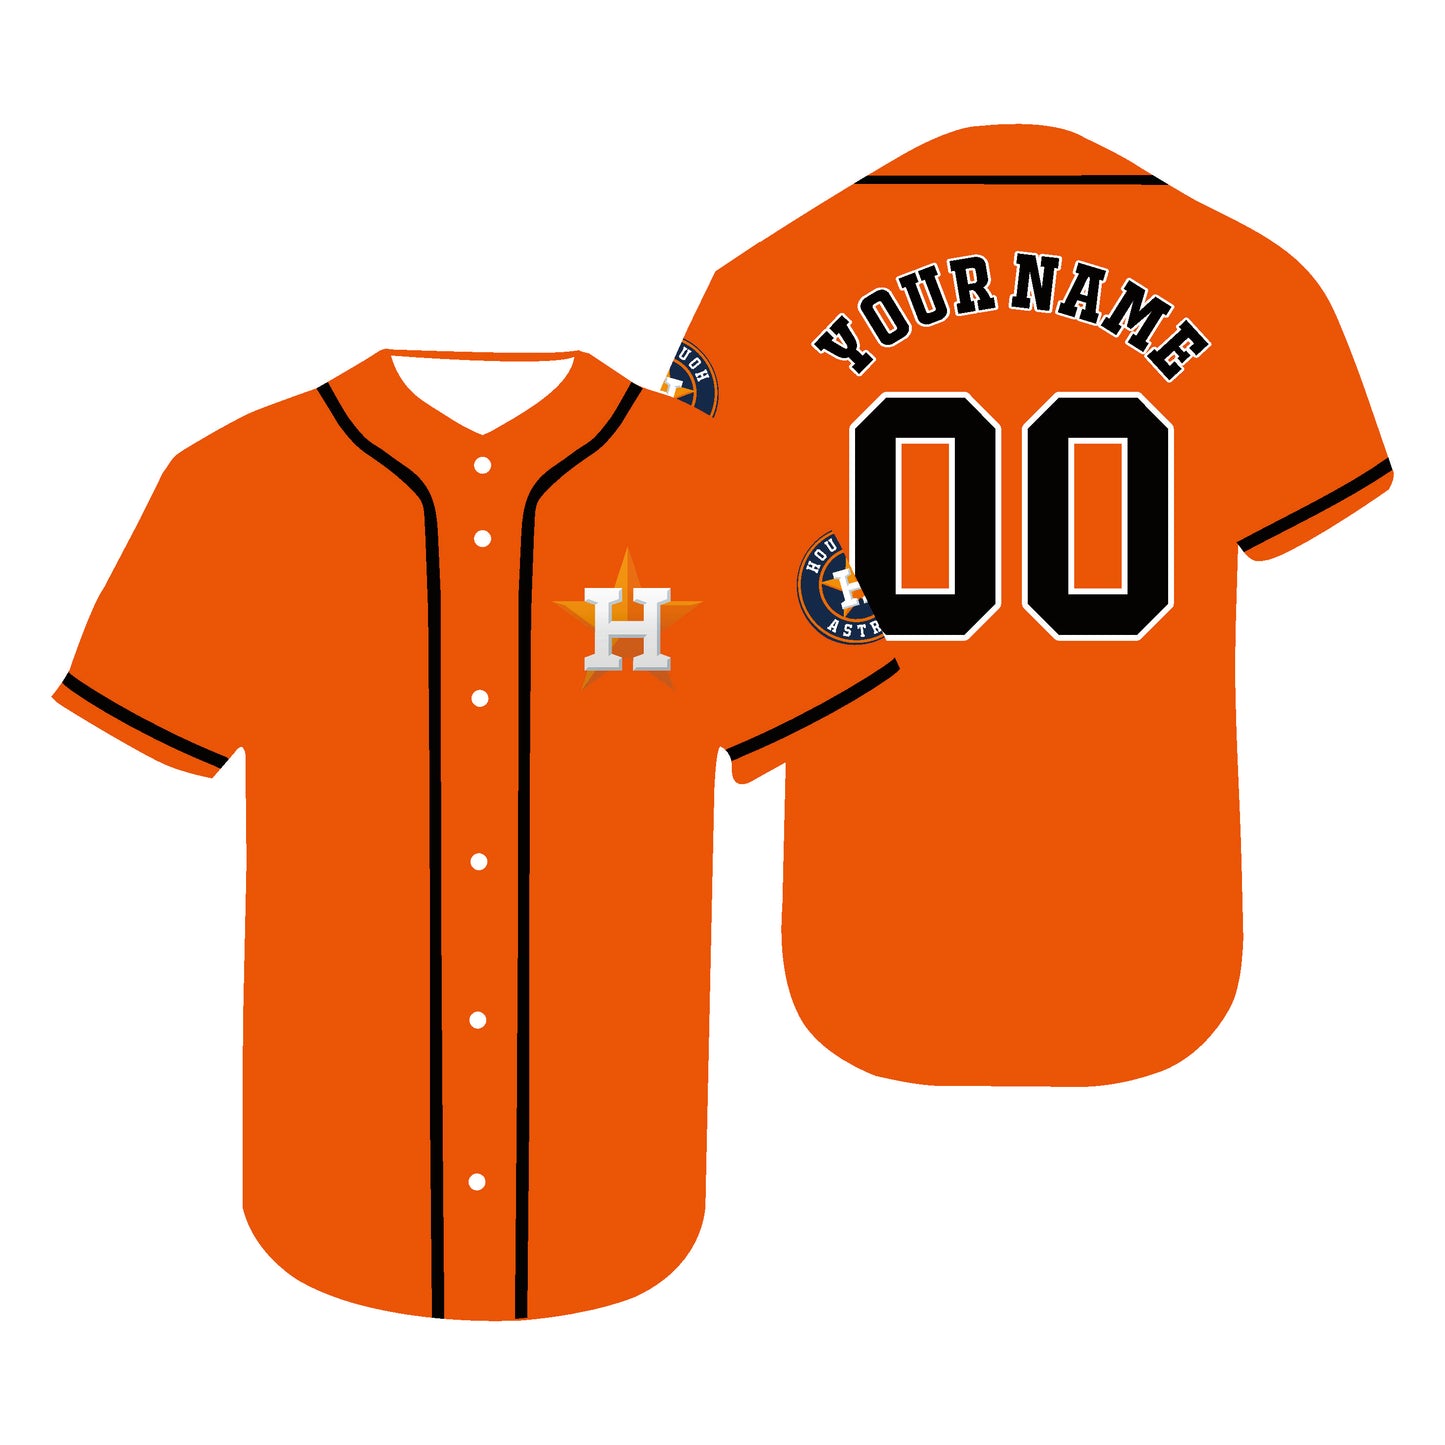 Custom Jerseys Baseball Houston Astros Orange Personalized Jersey Stitched Letter And Numbers For Men Women Youth Birthday Gift